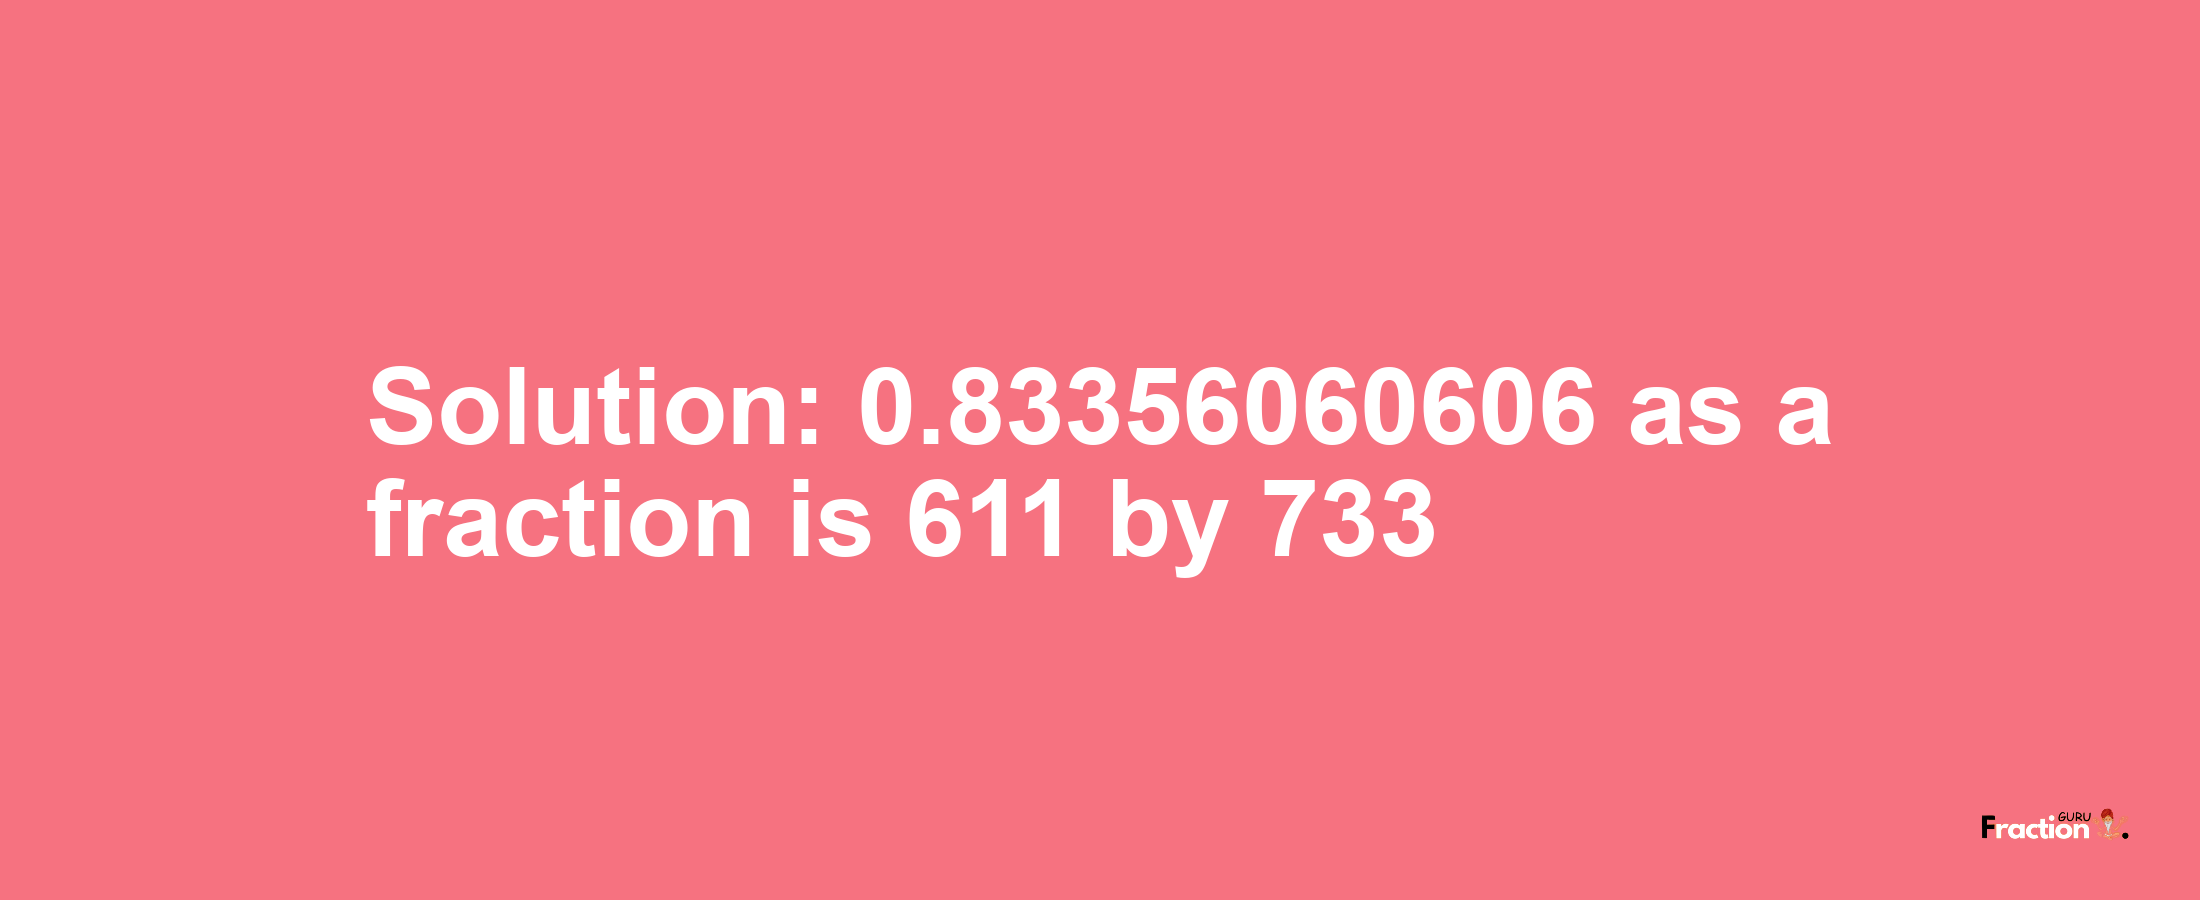 Solution:0.83356060606 as a fraction is 611/733